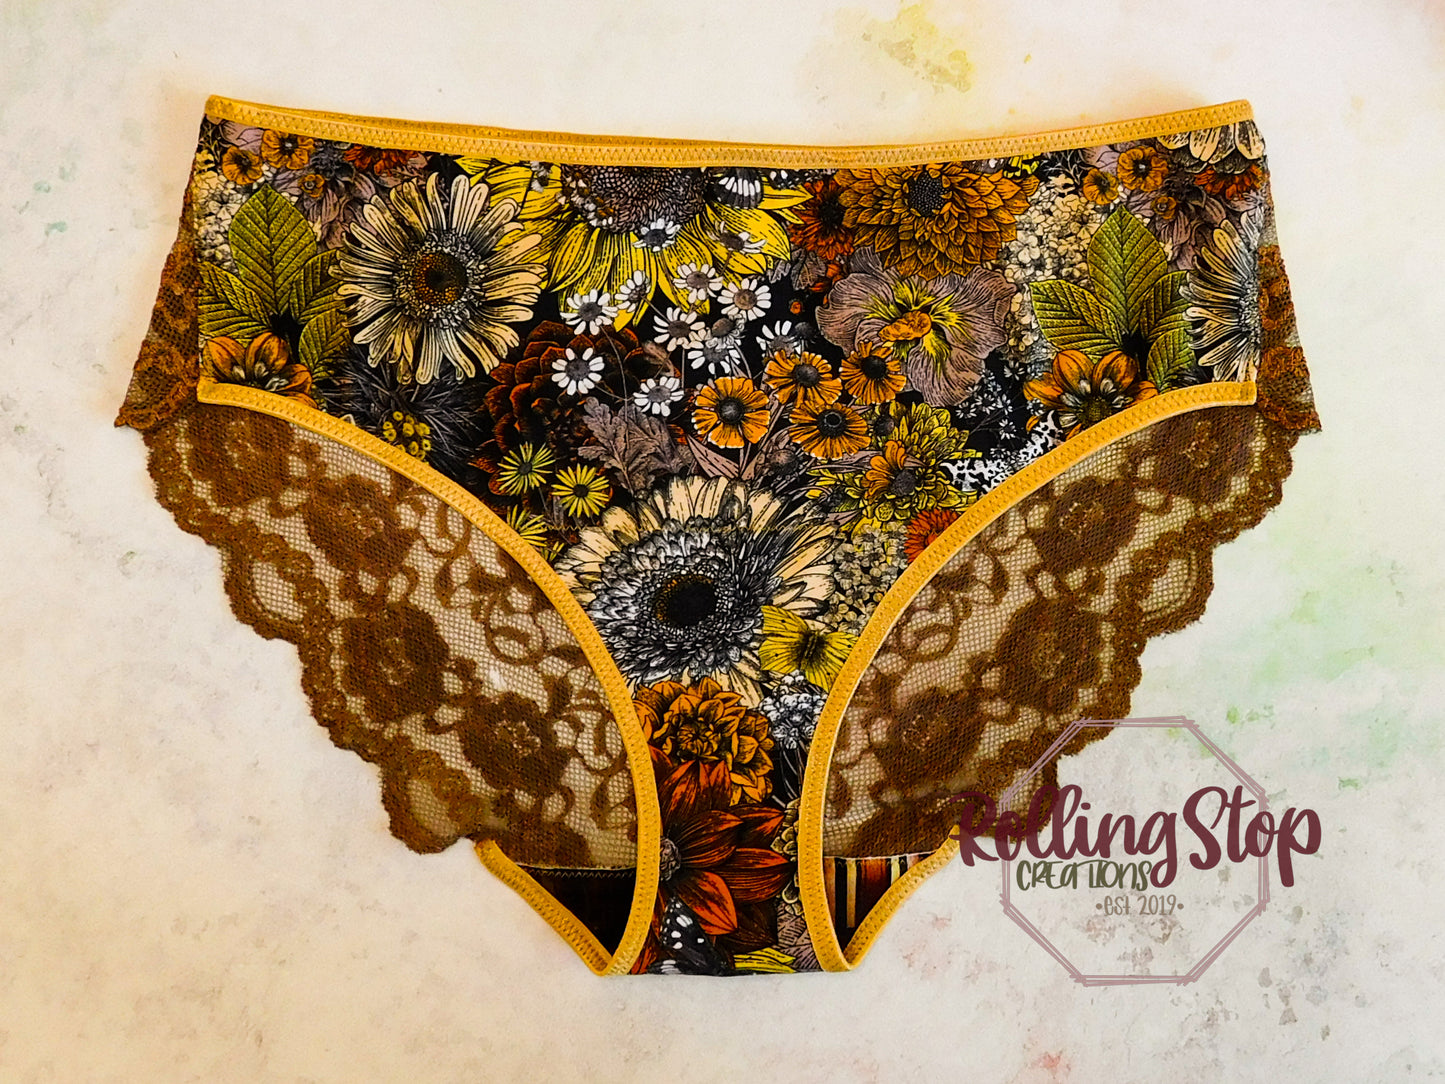 Fall Floral Lace Back Pantydrawls by Rolling Stop Creations sold by Rolling Stop Creations Lace - Lingerie - Panties